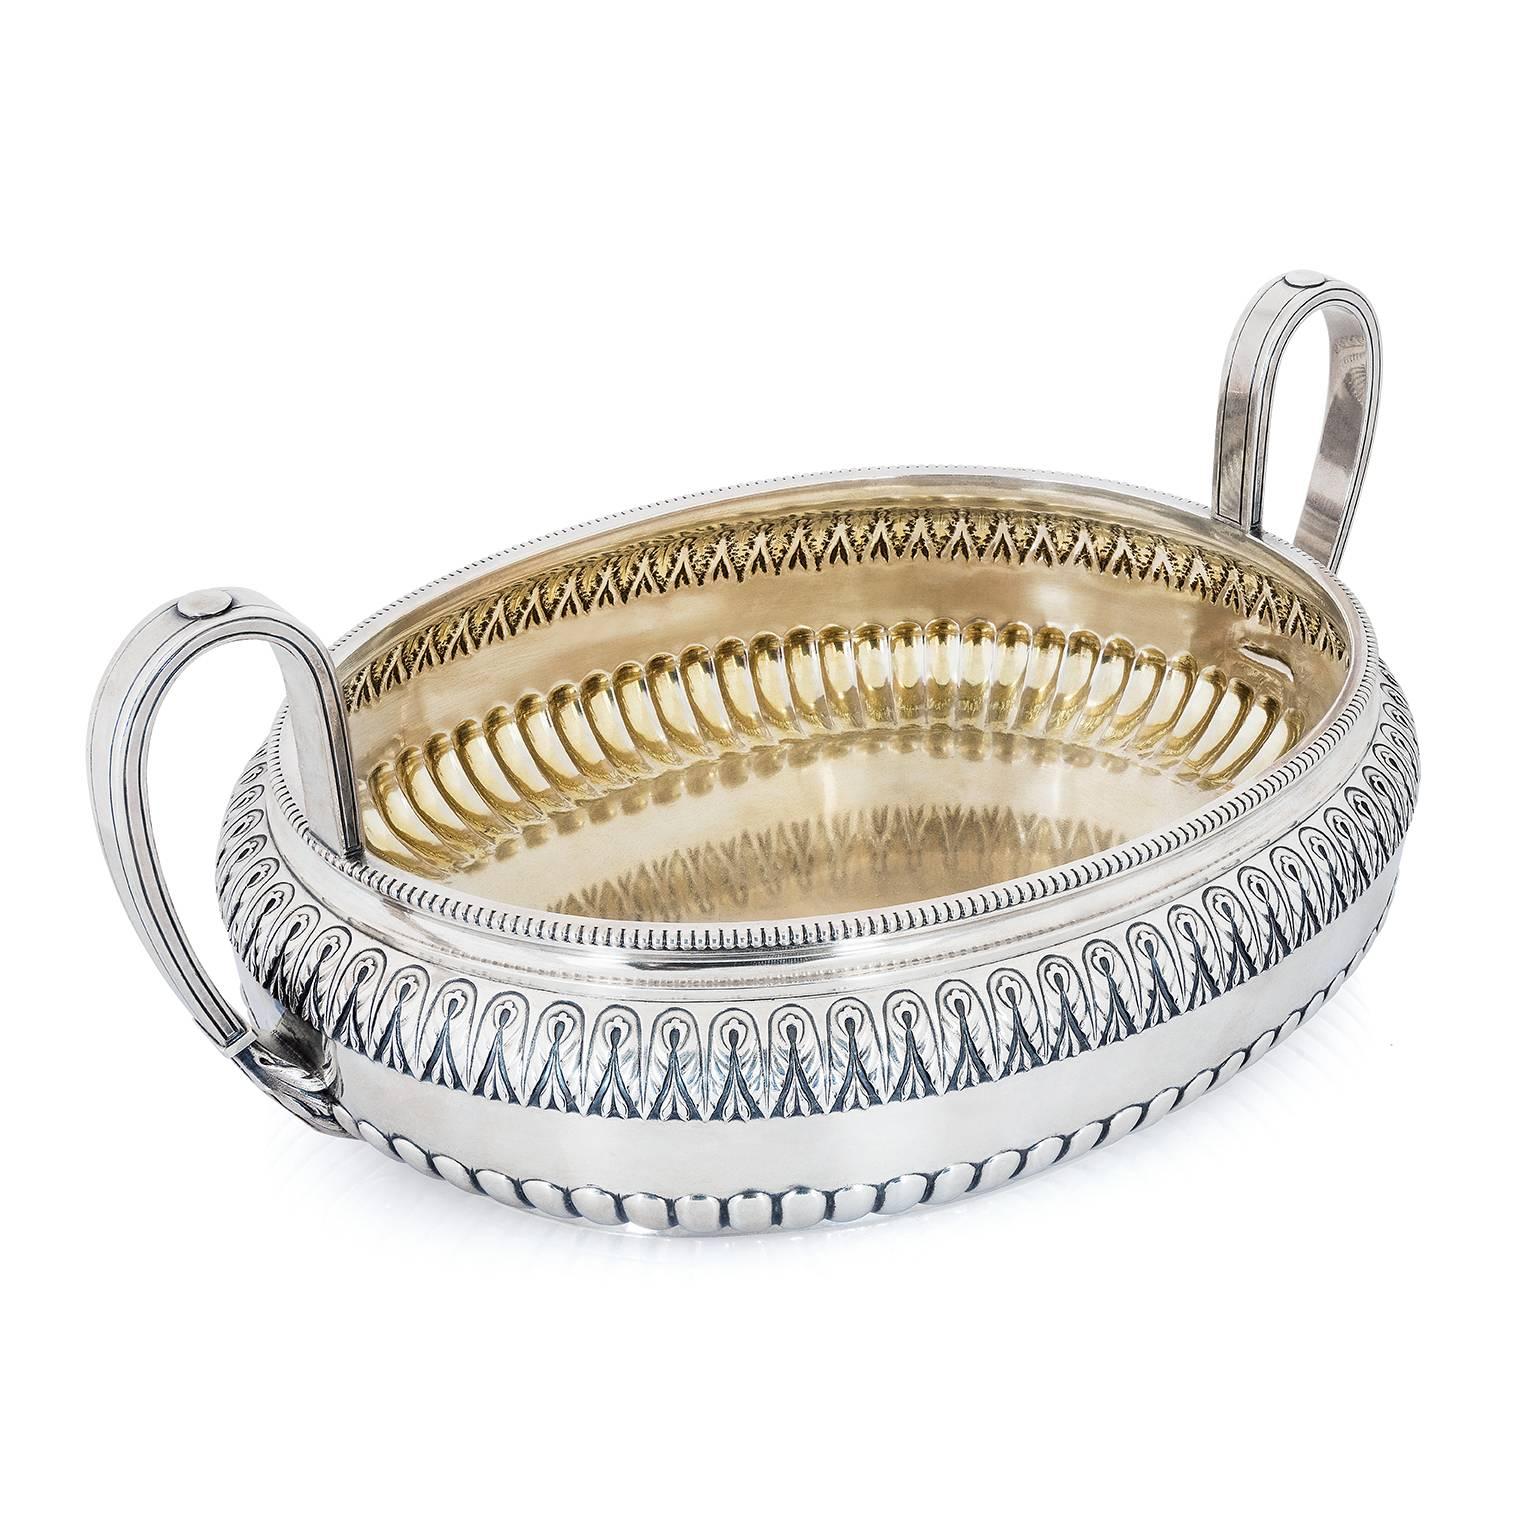 A silver fruit bowl by Fabergé, on short straight foot, oval-shaped, with rounded body and beaded outer rim, the lower section fluted, the upper section chased with an ornate pattern band of foliate motif, a pair of ribbon-shaped vertical handles